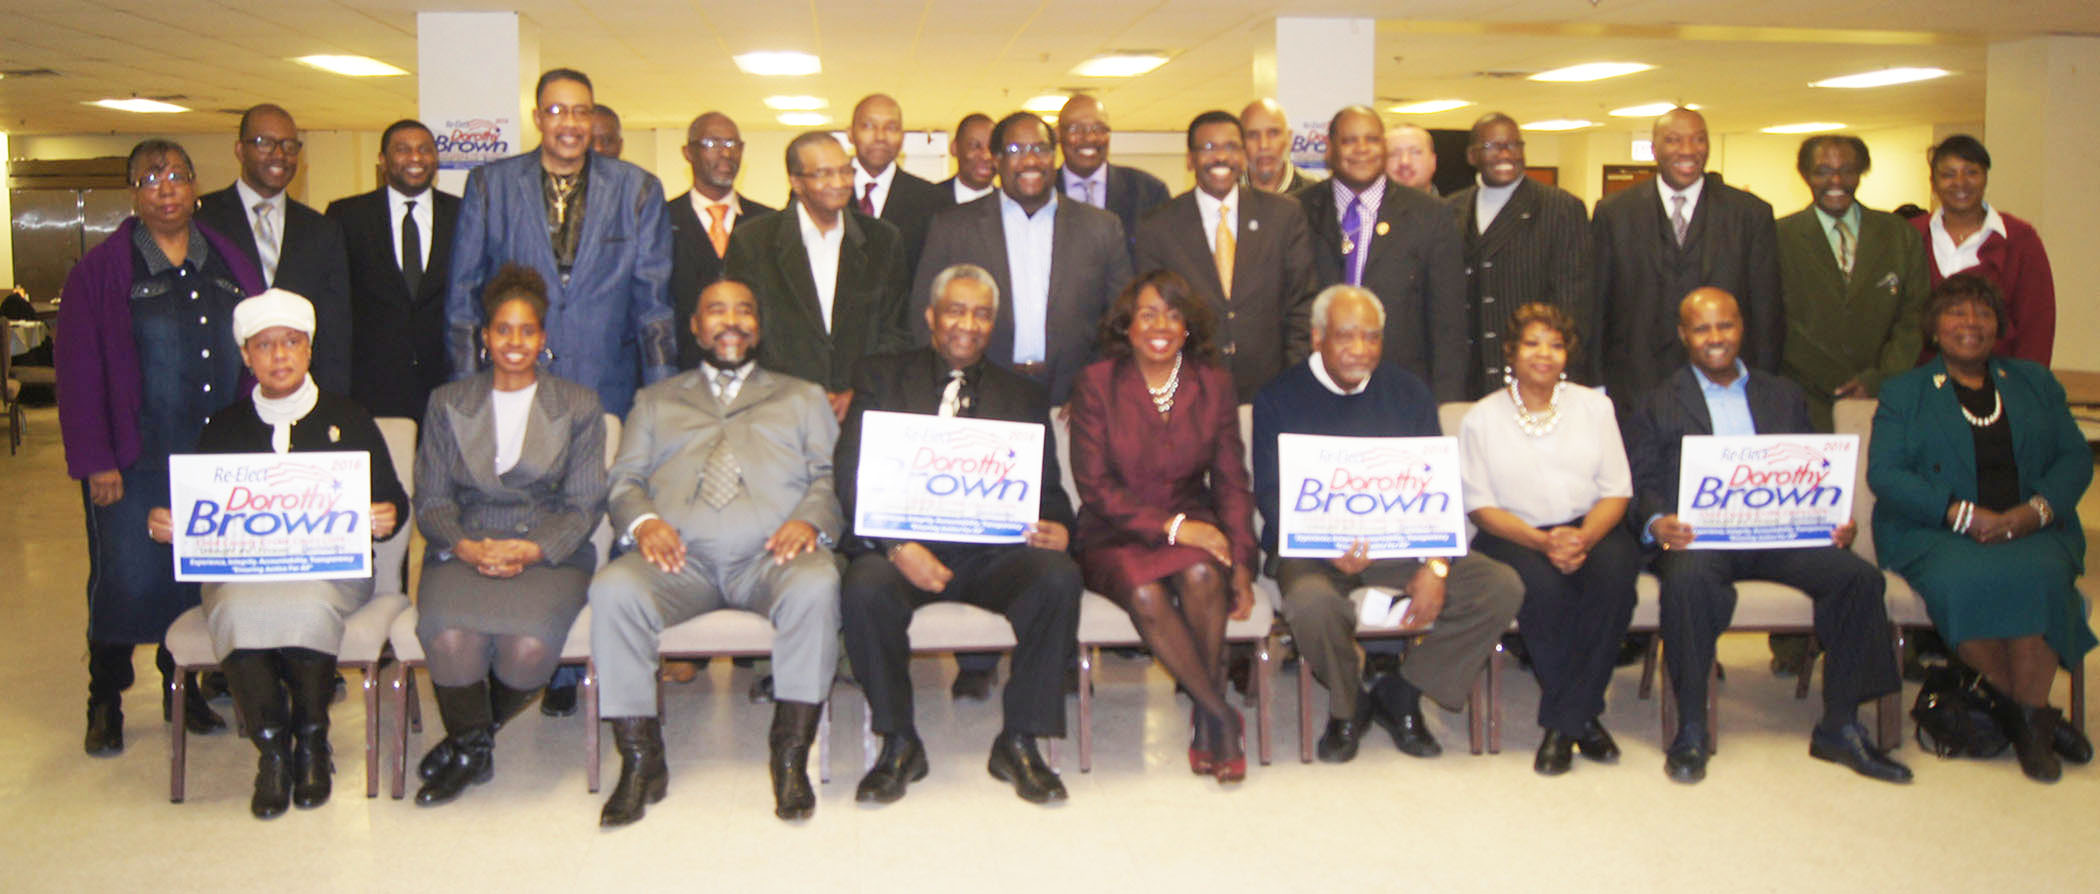 Local area Pastors, ministers and political leaders gathered for breakfast at the JLM Center to show support for Dorothy Brown to be re-elected for Cook County Clerk of the Circuit Court